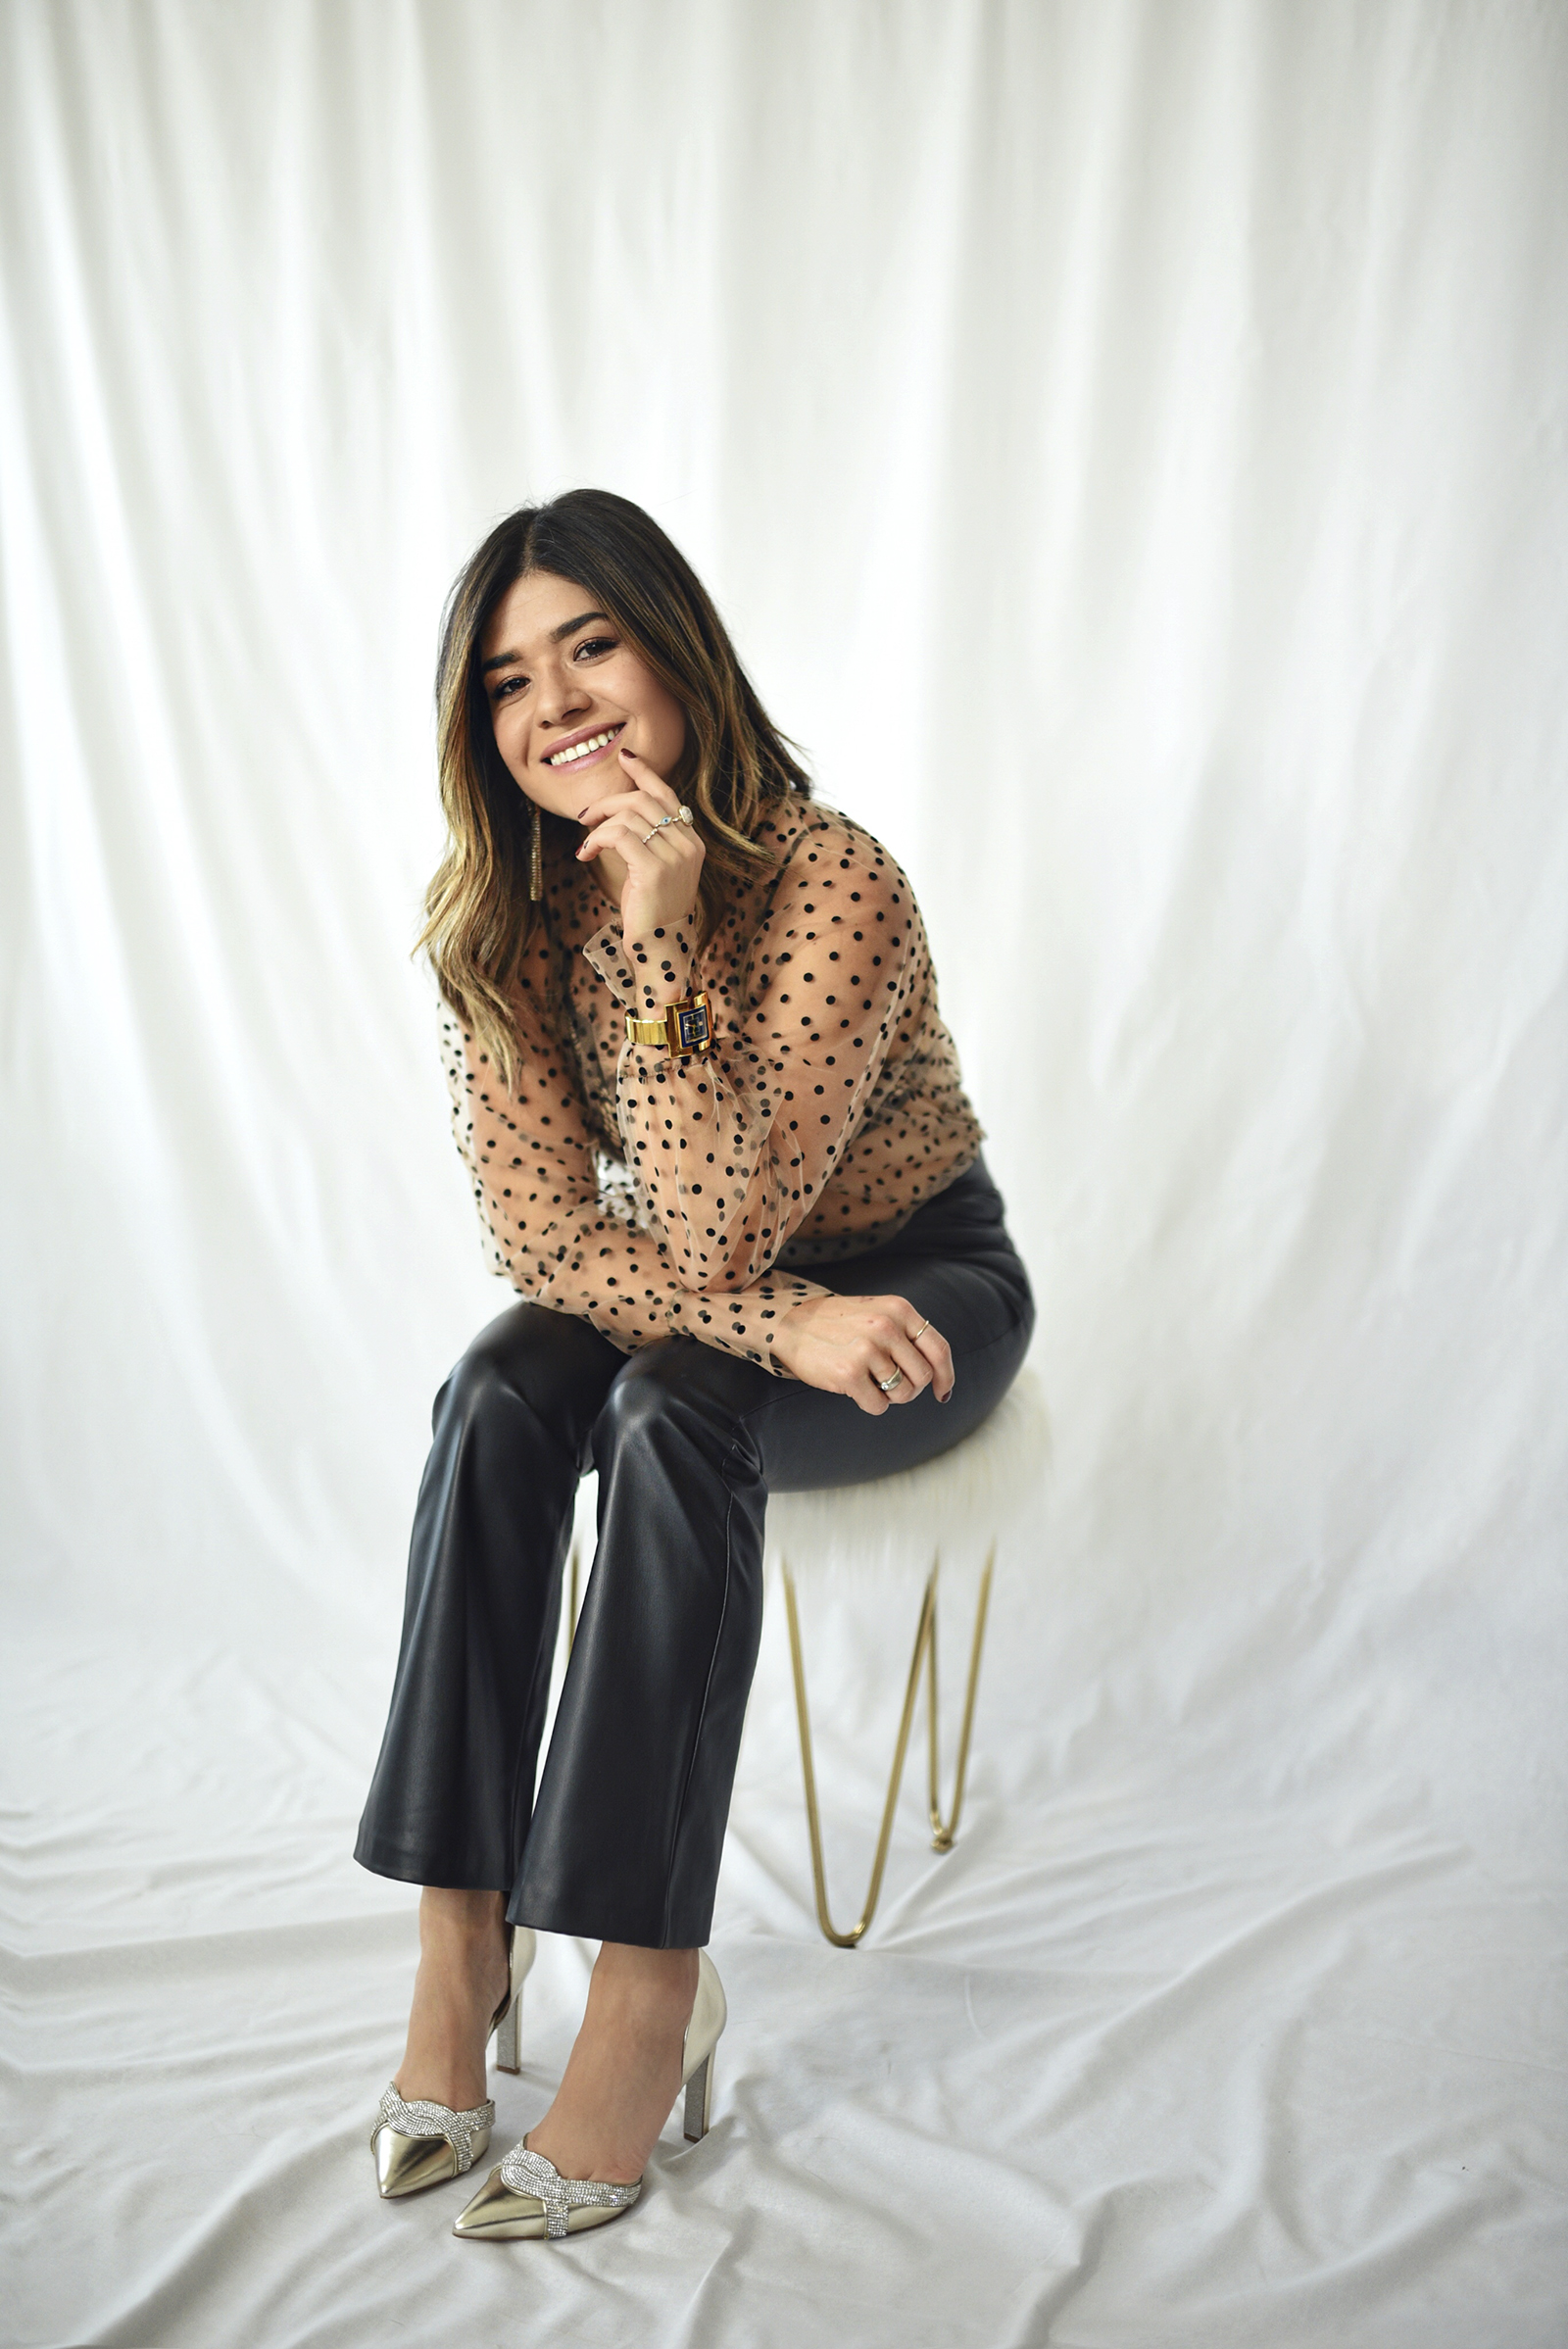 HOLIDAY STYLE GUIDE BY CAROLINA HELLAL OF CHIC TALK